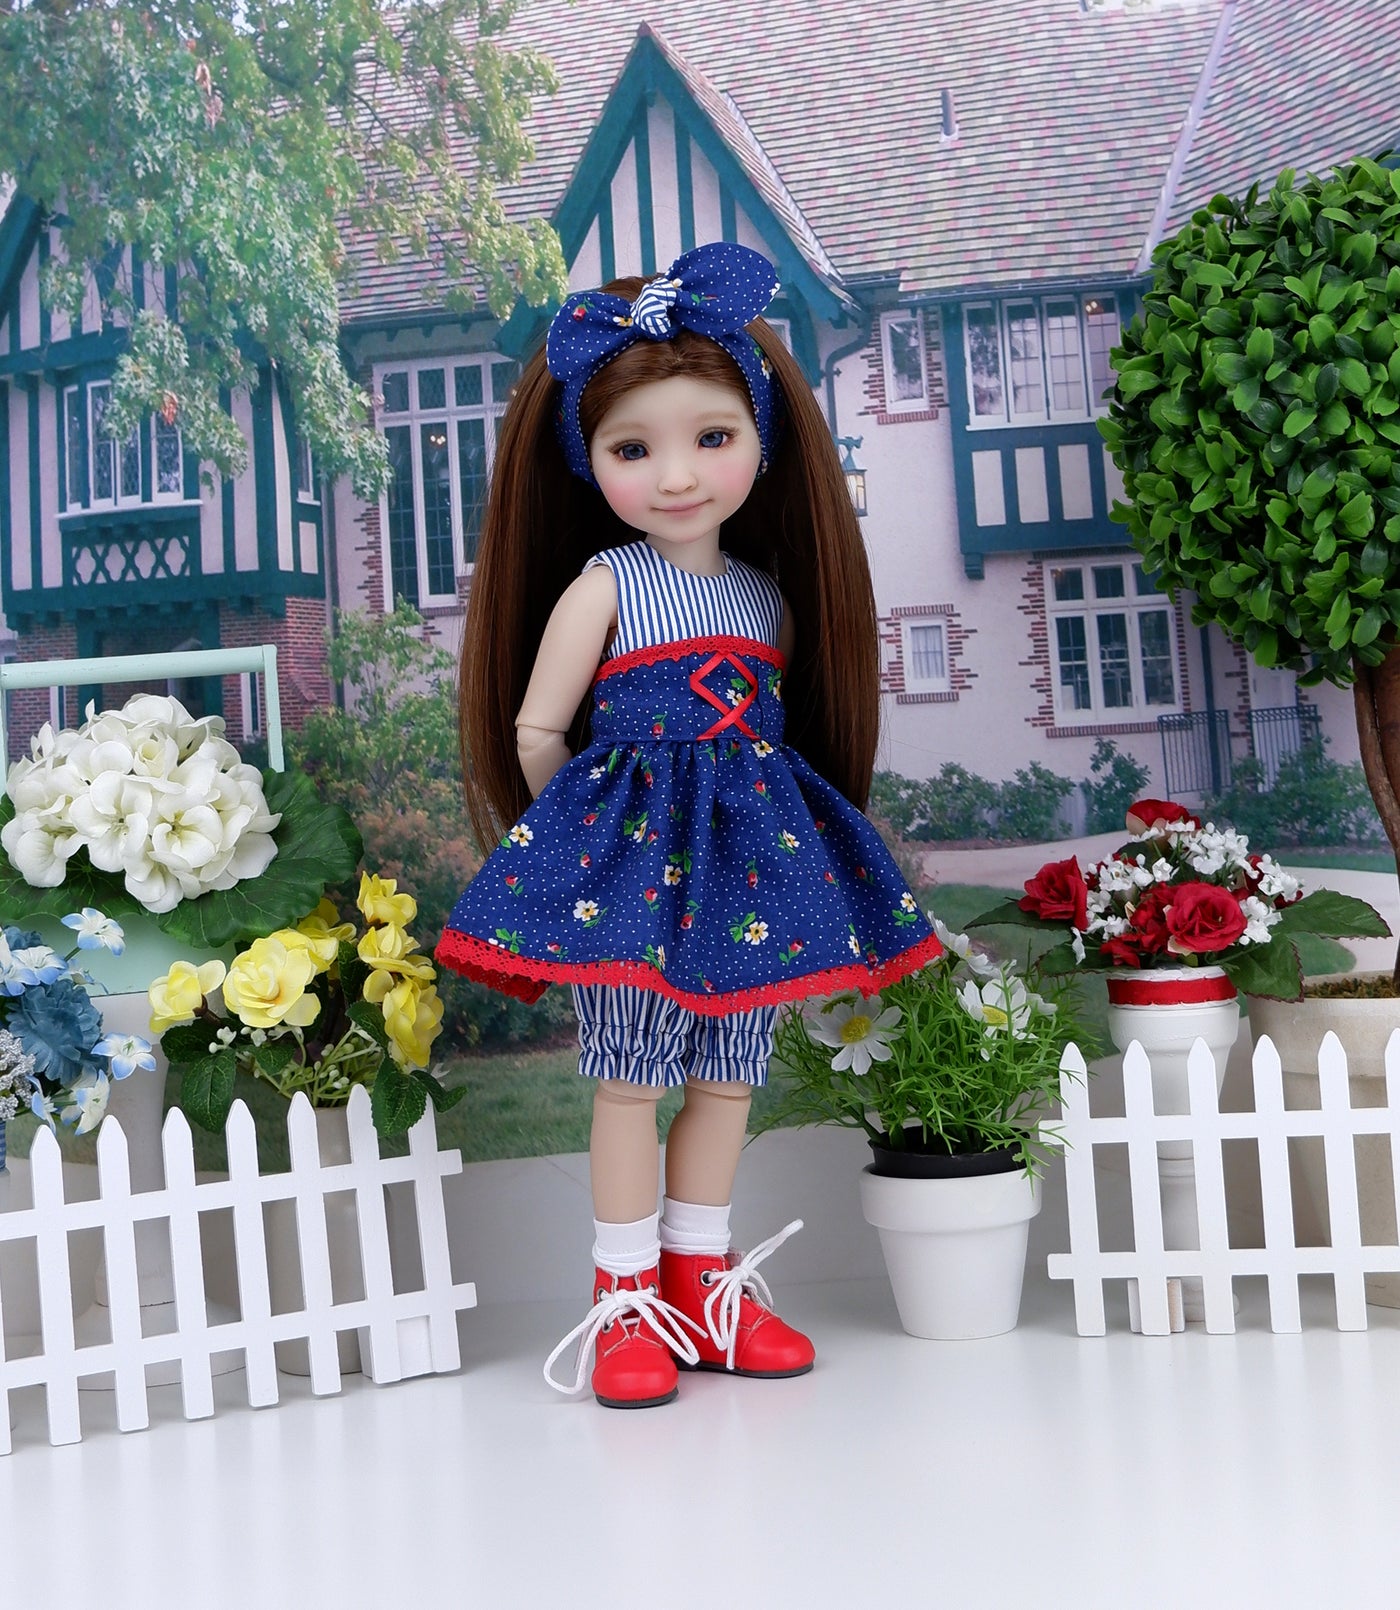 Swiss Daisy - romper and apron with boots for Ruby Red Fashion Friends doll